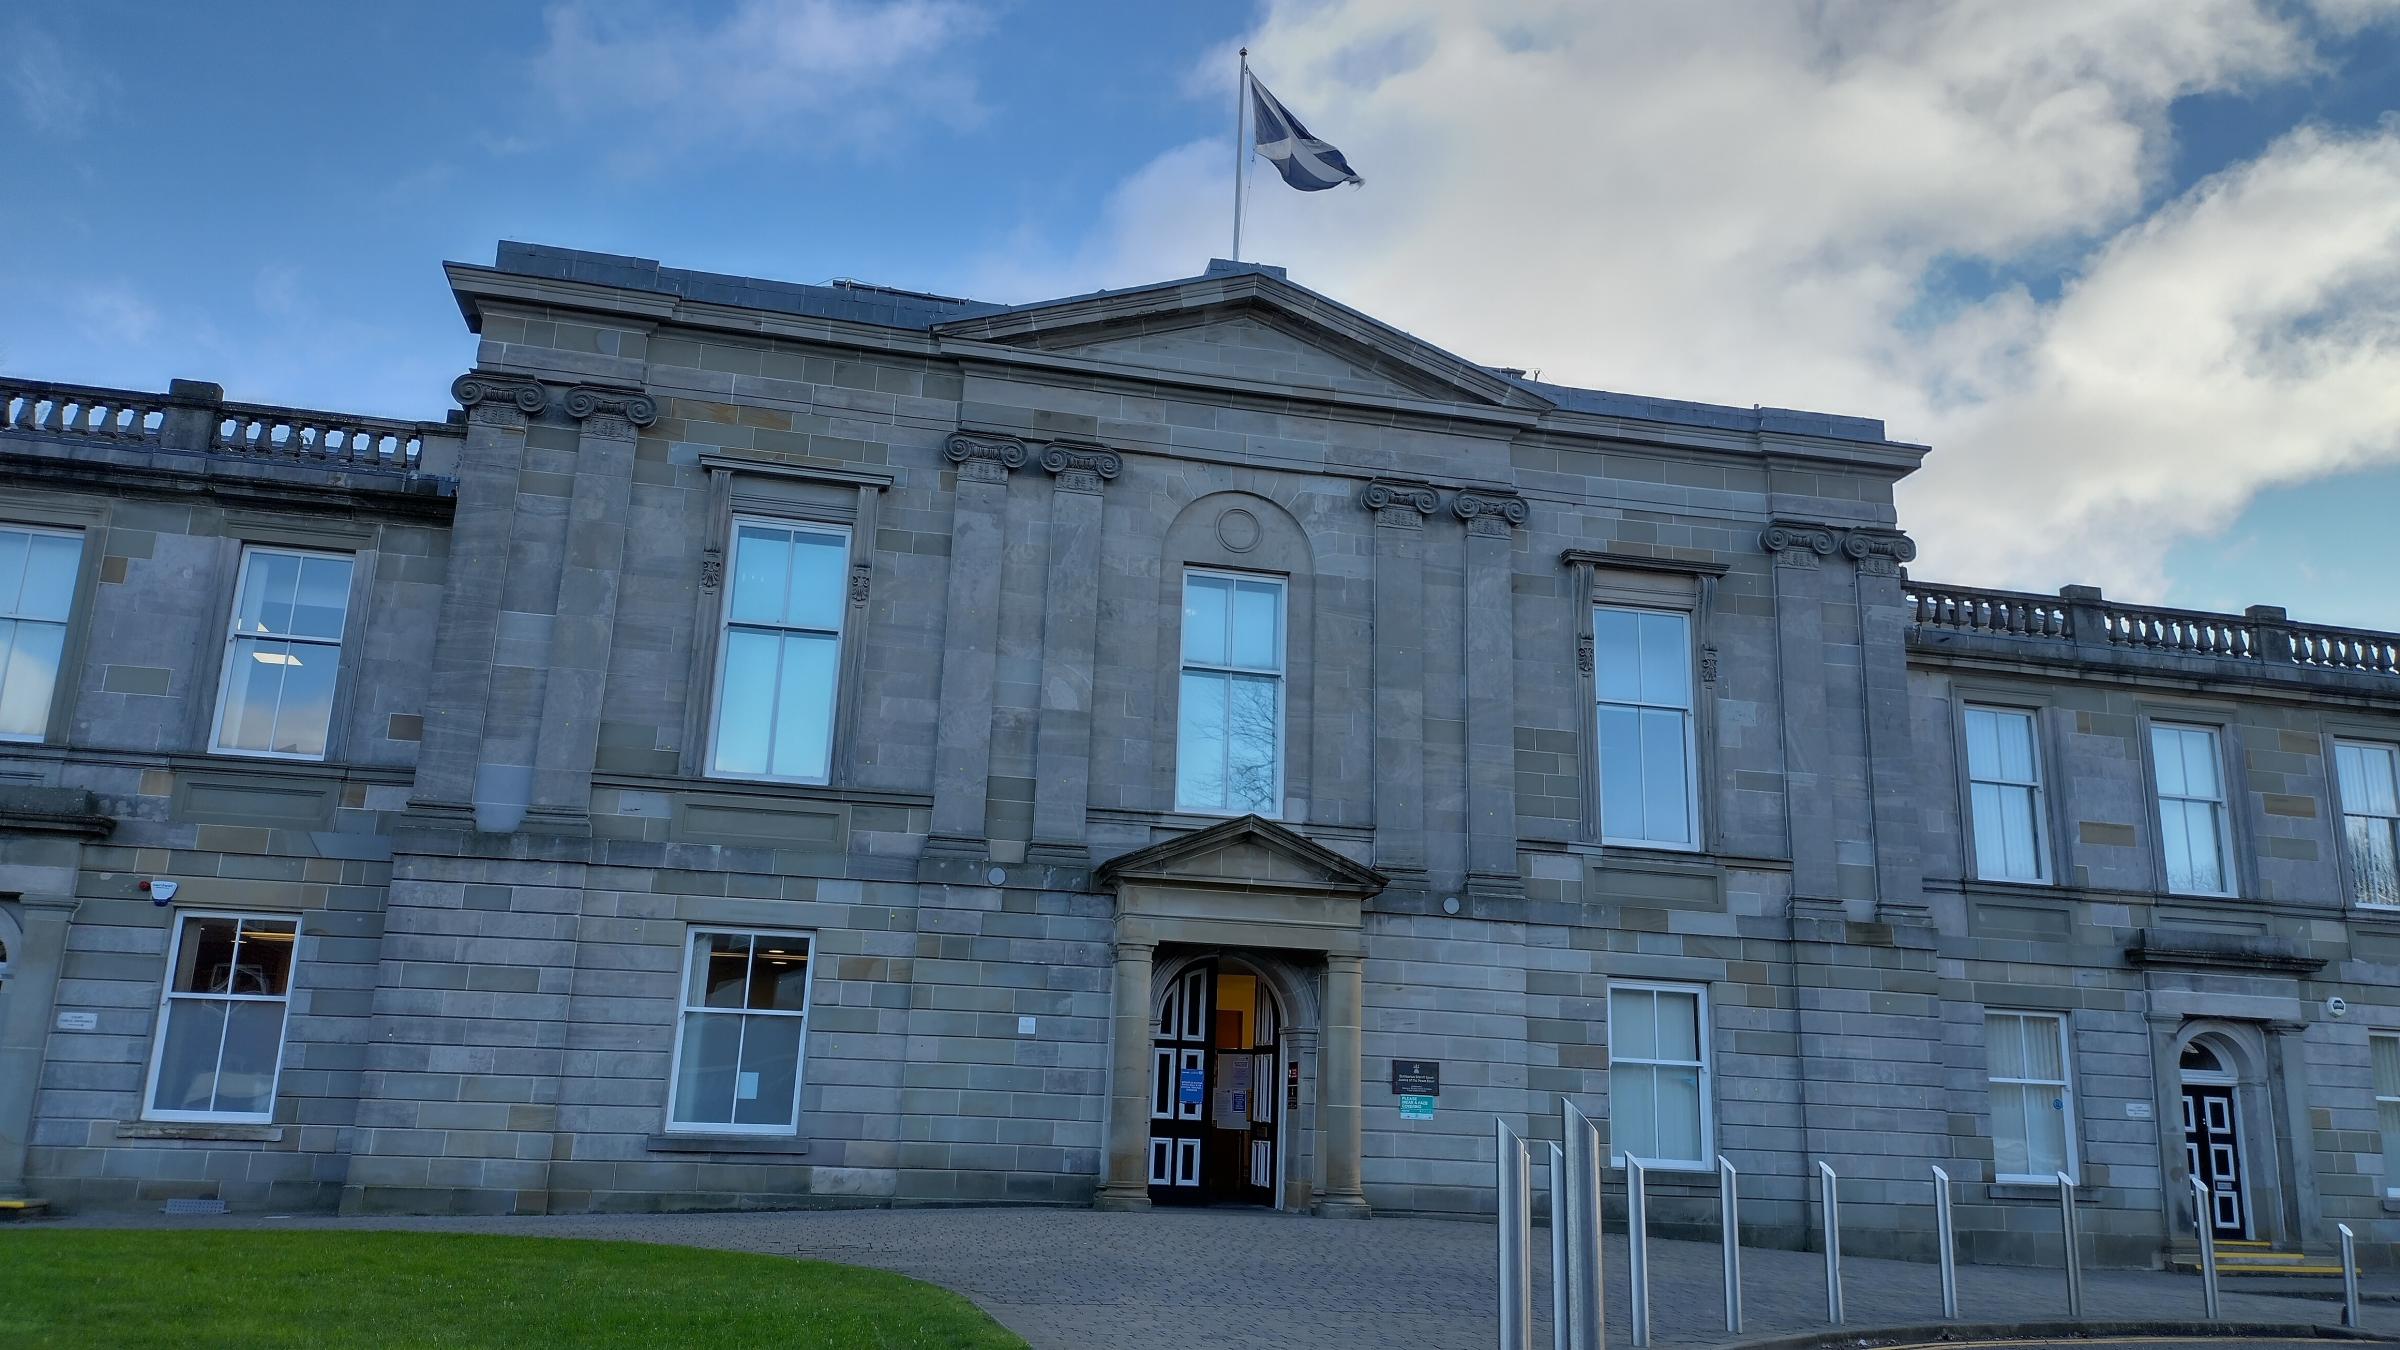 Clydebank crime: Three men appear in court charged with 'serious organised crime'